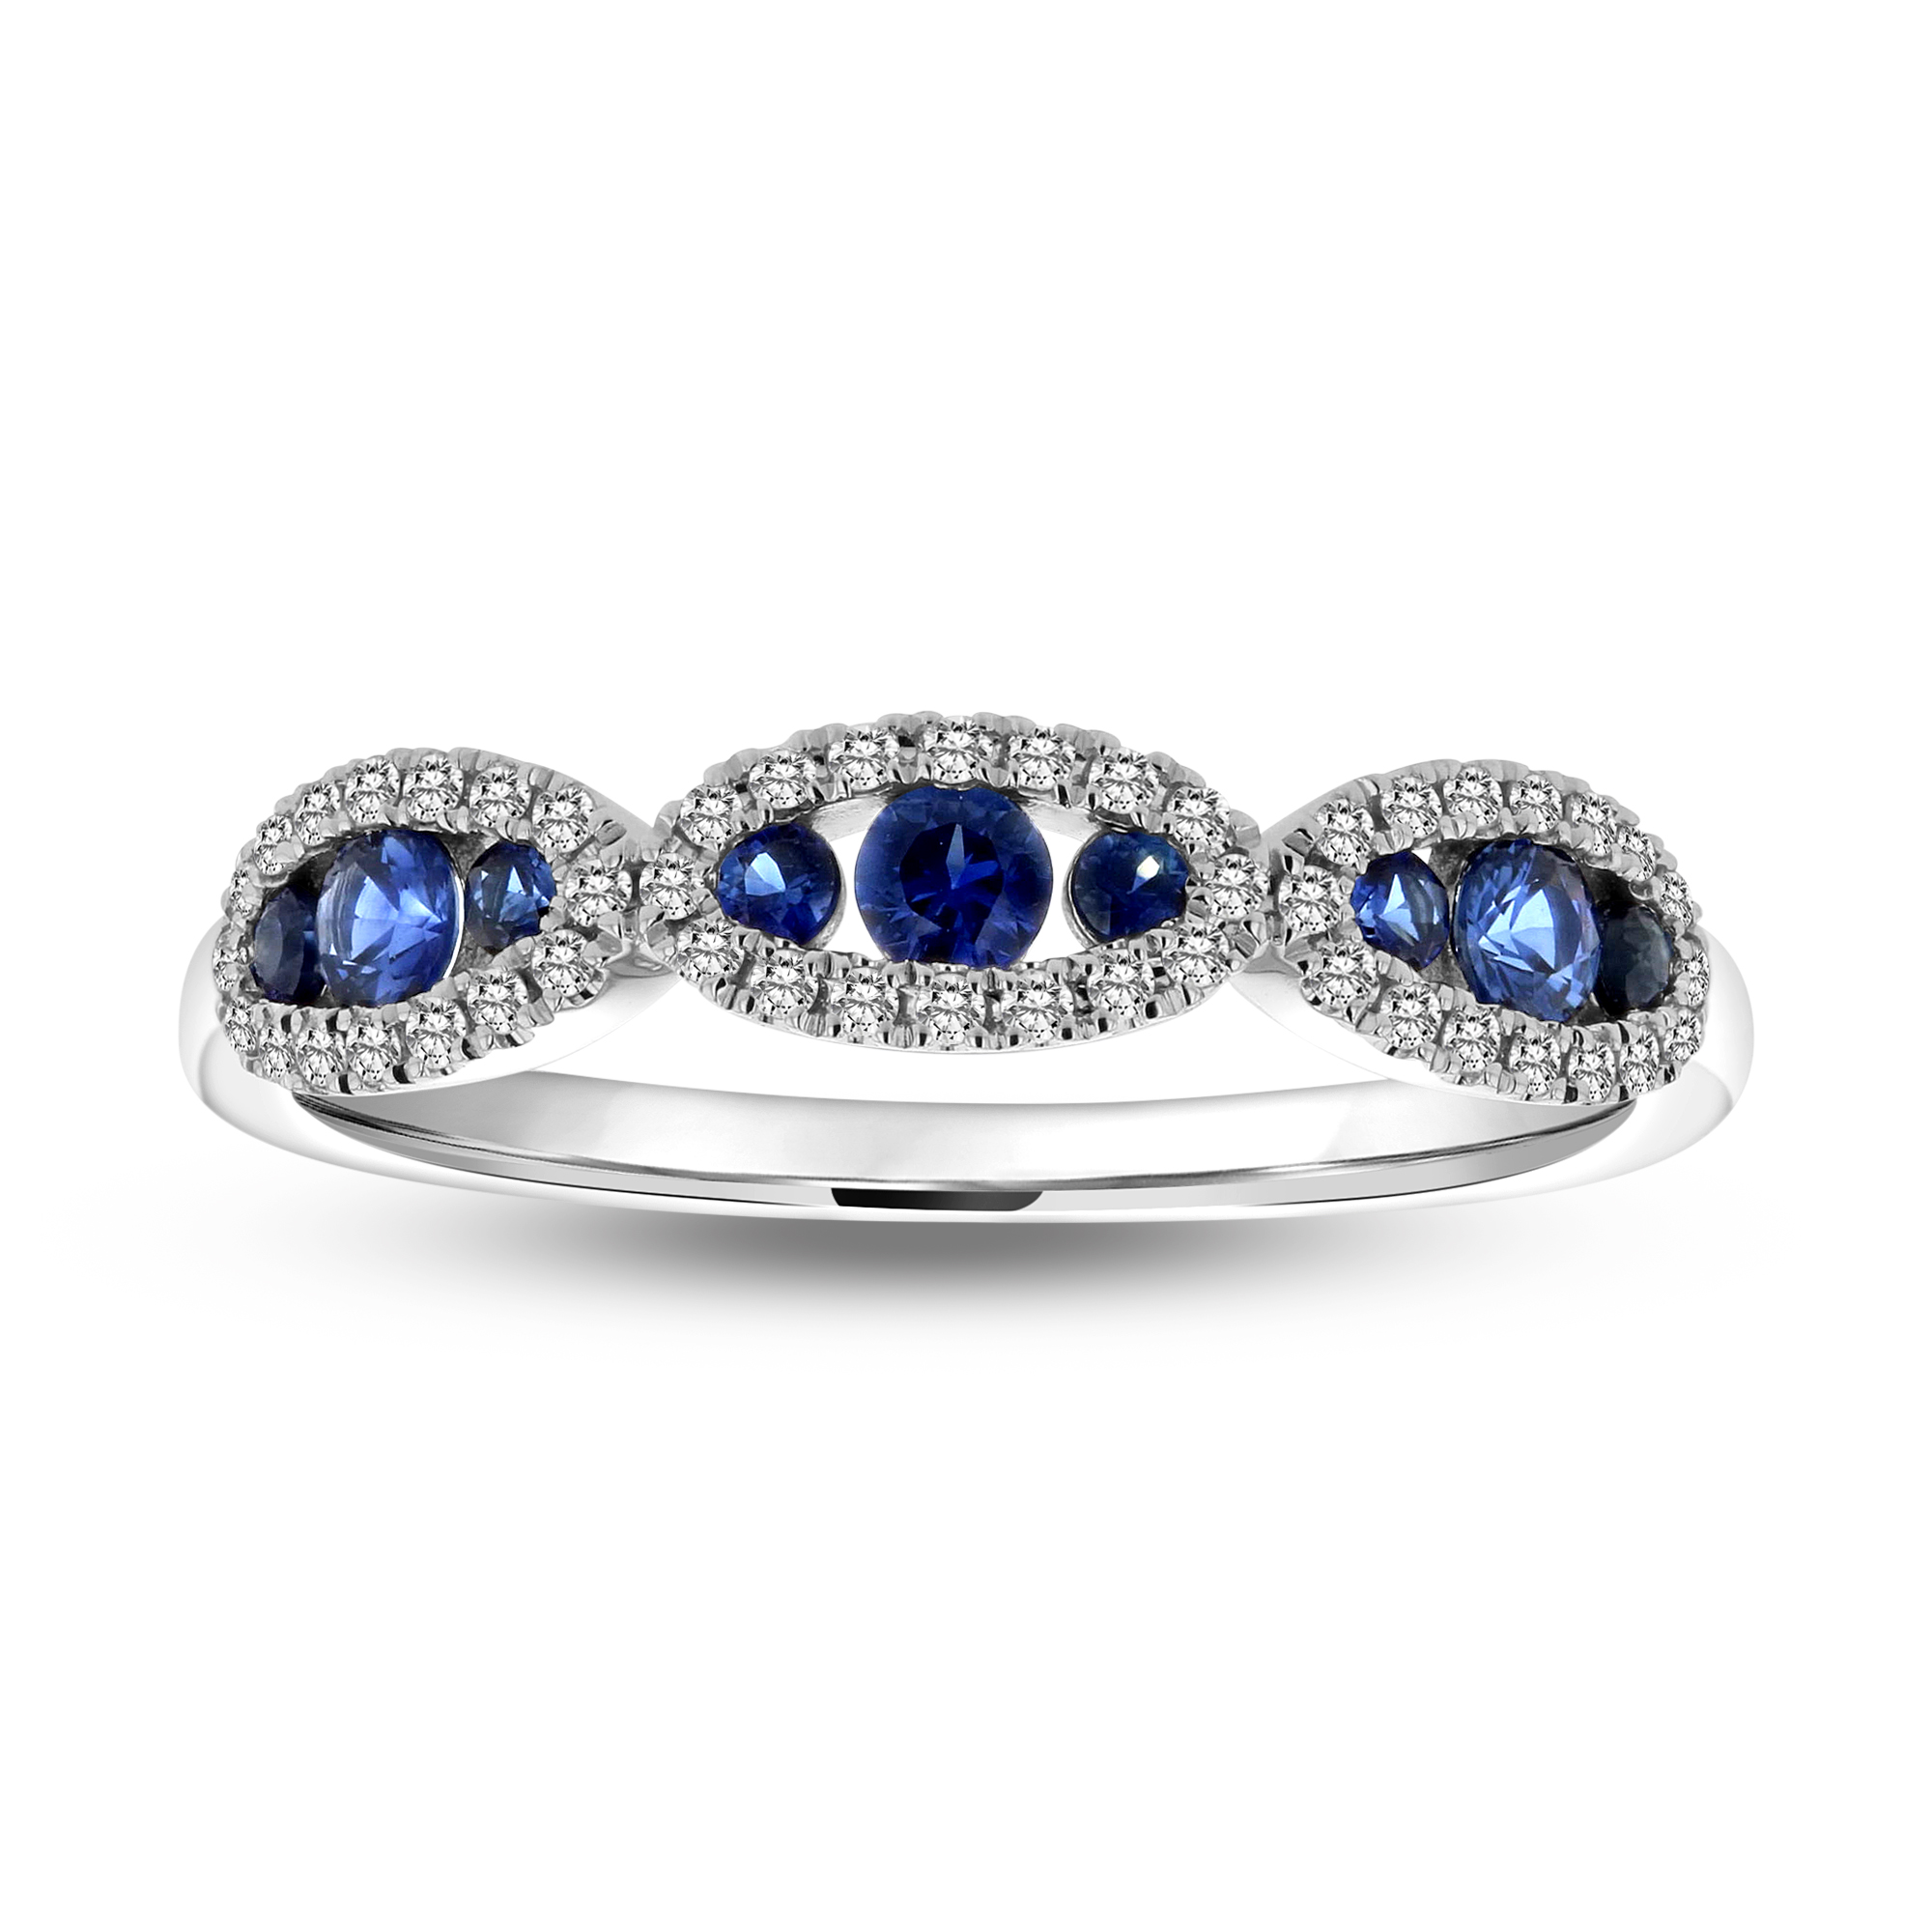 View 0.49ctw Diamond and Sapphire Band in 14k White Gold